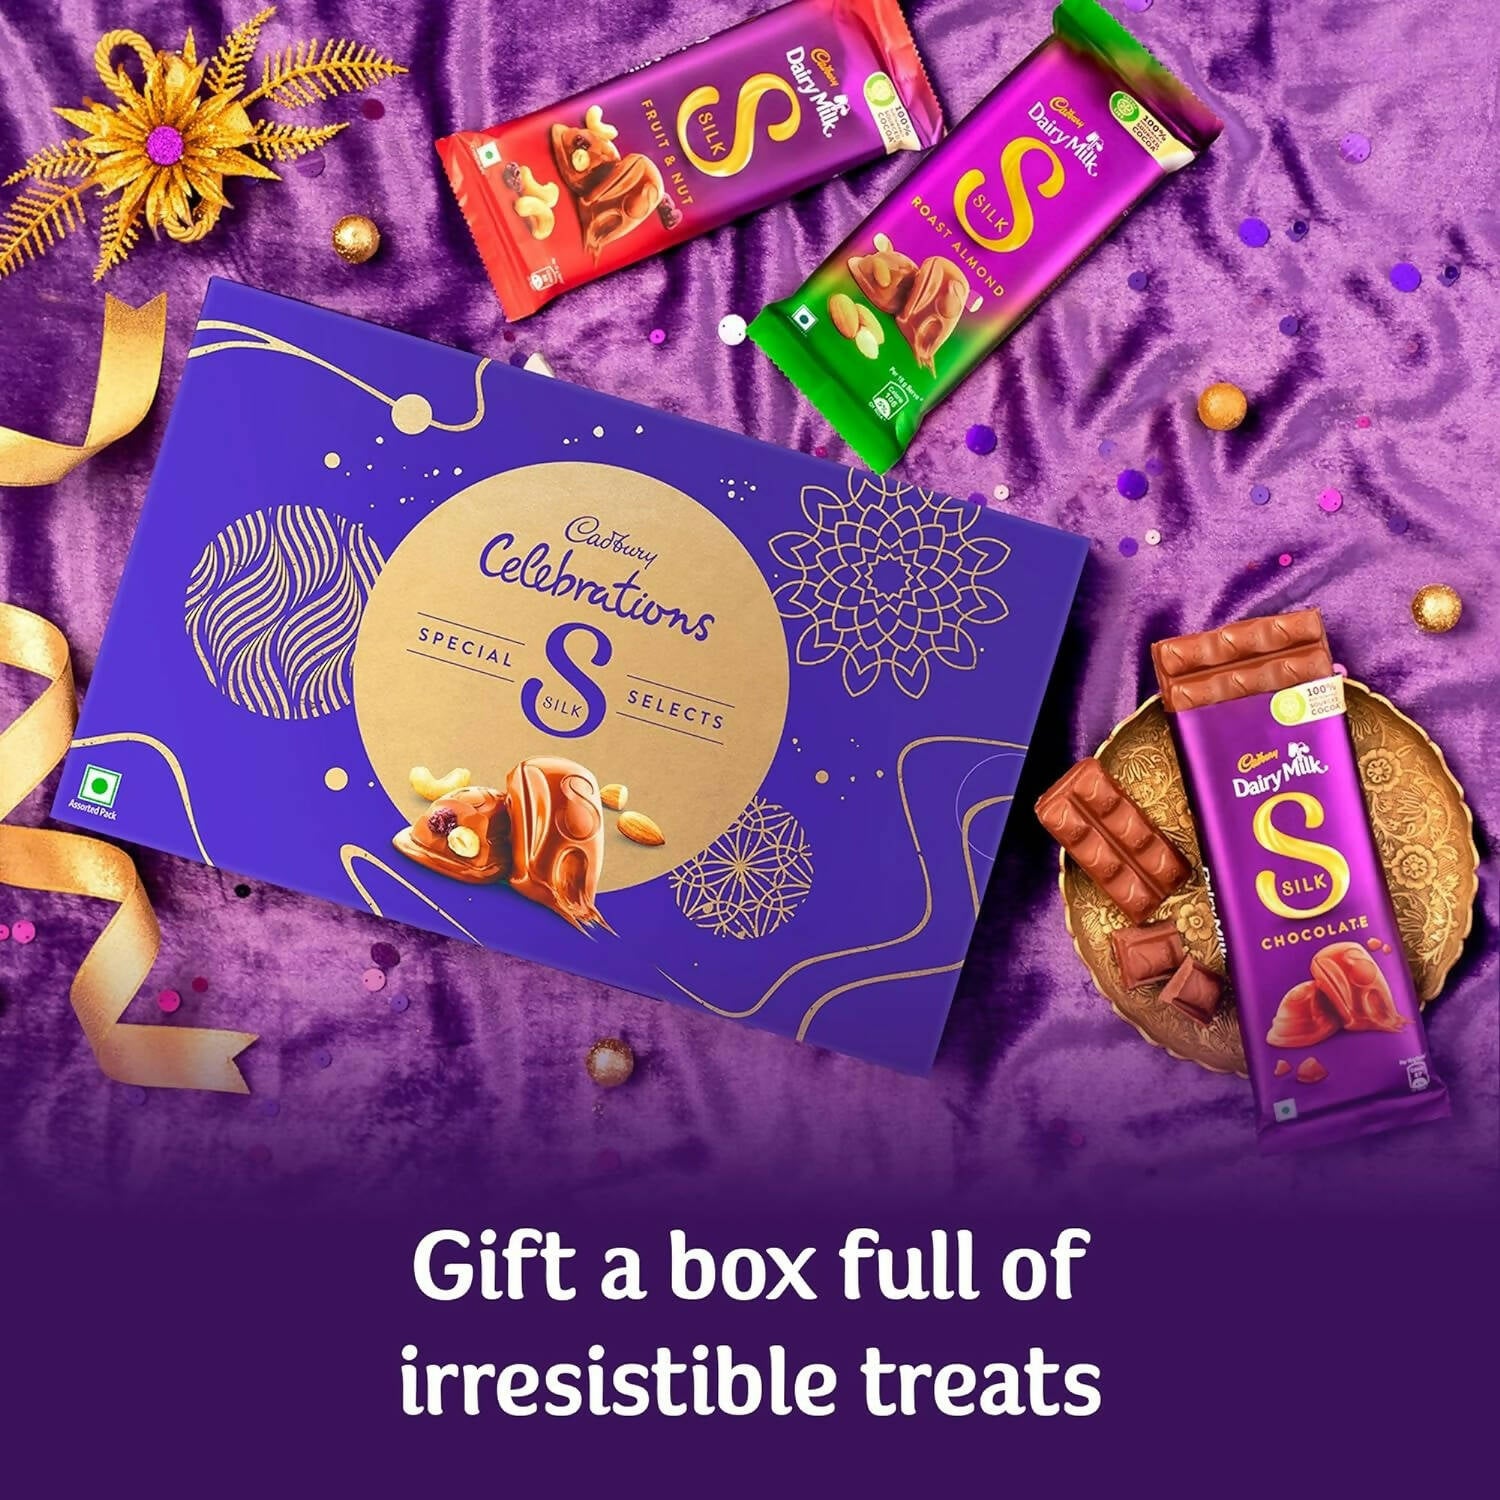 Cadbury Celebrations 167.9g Of Assorted Chocolate Gift Pack For Your Loved  Ones | eBay